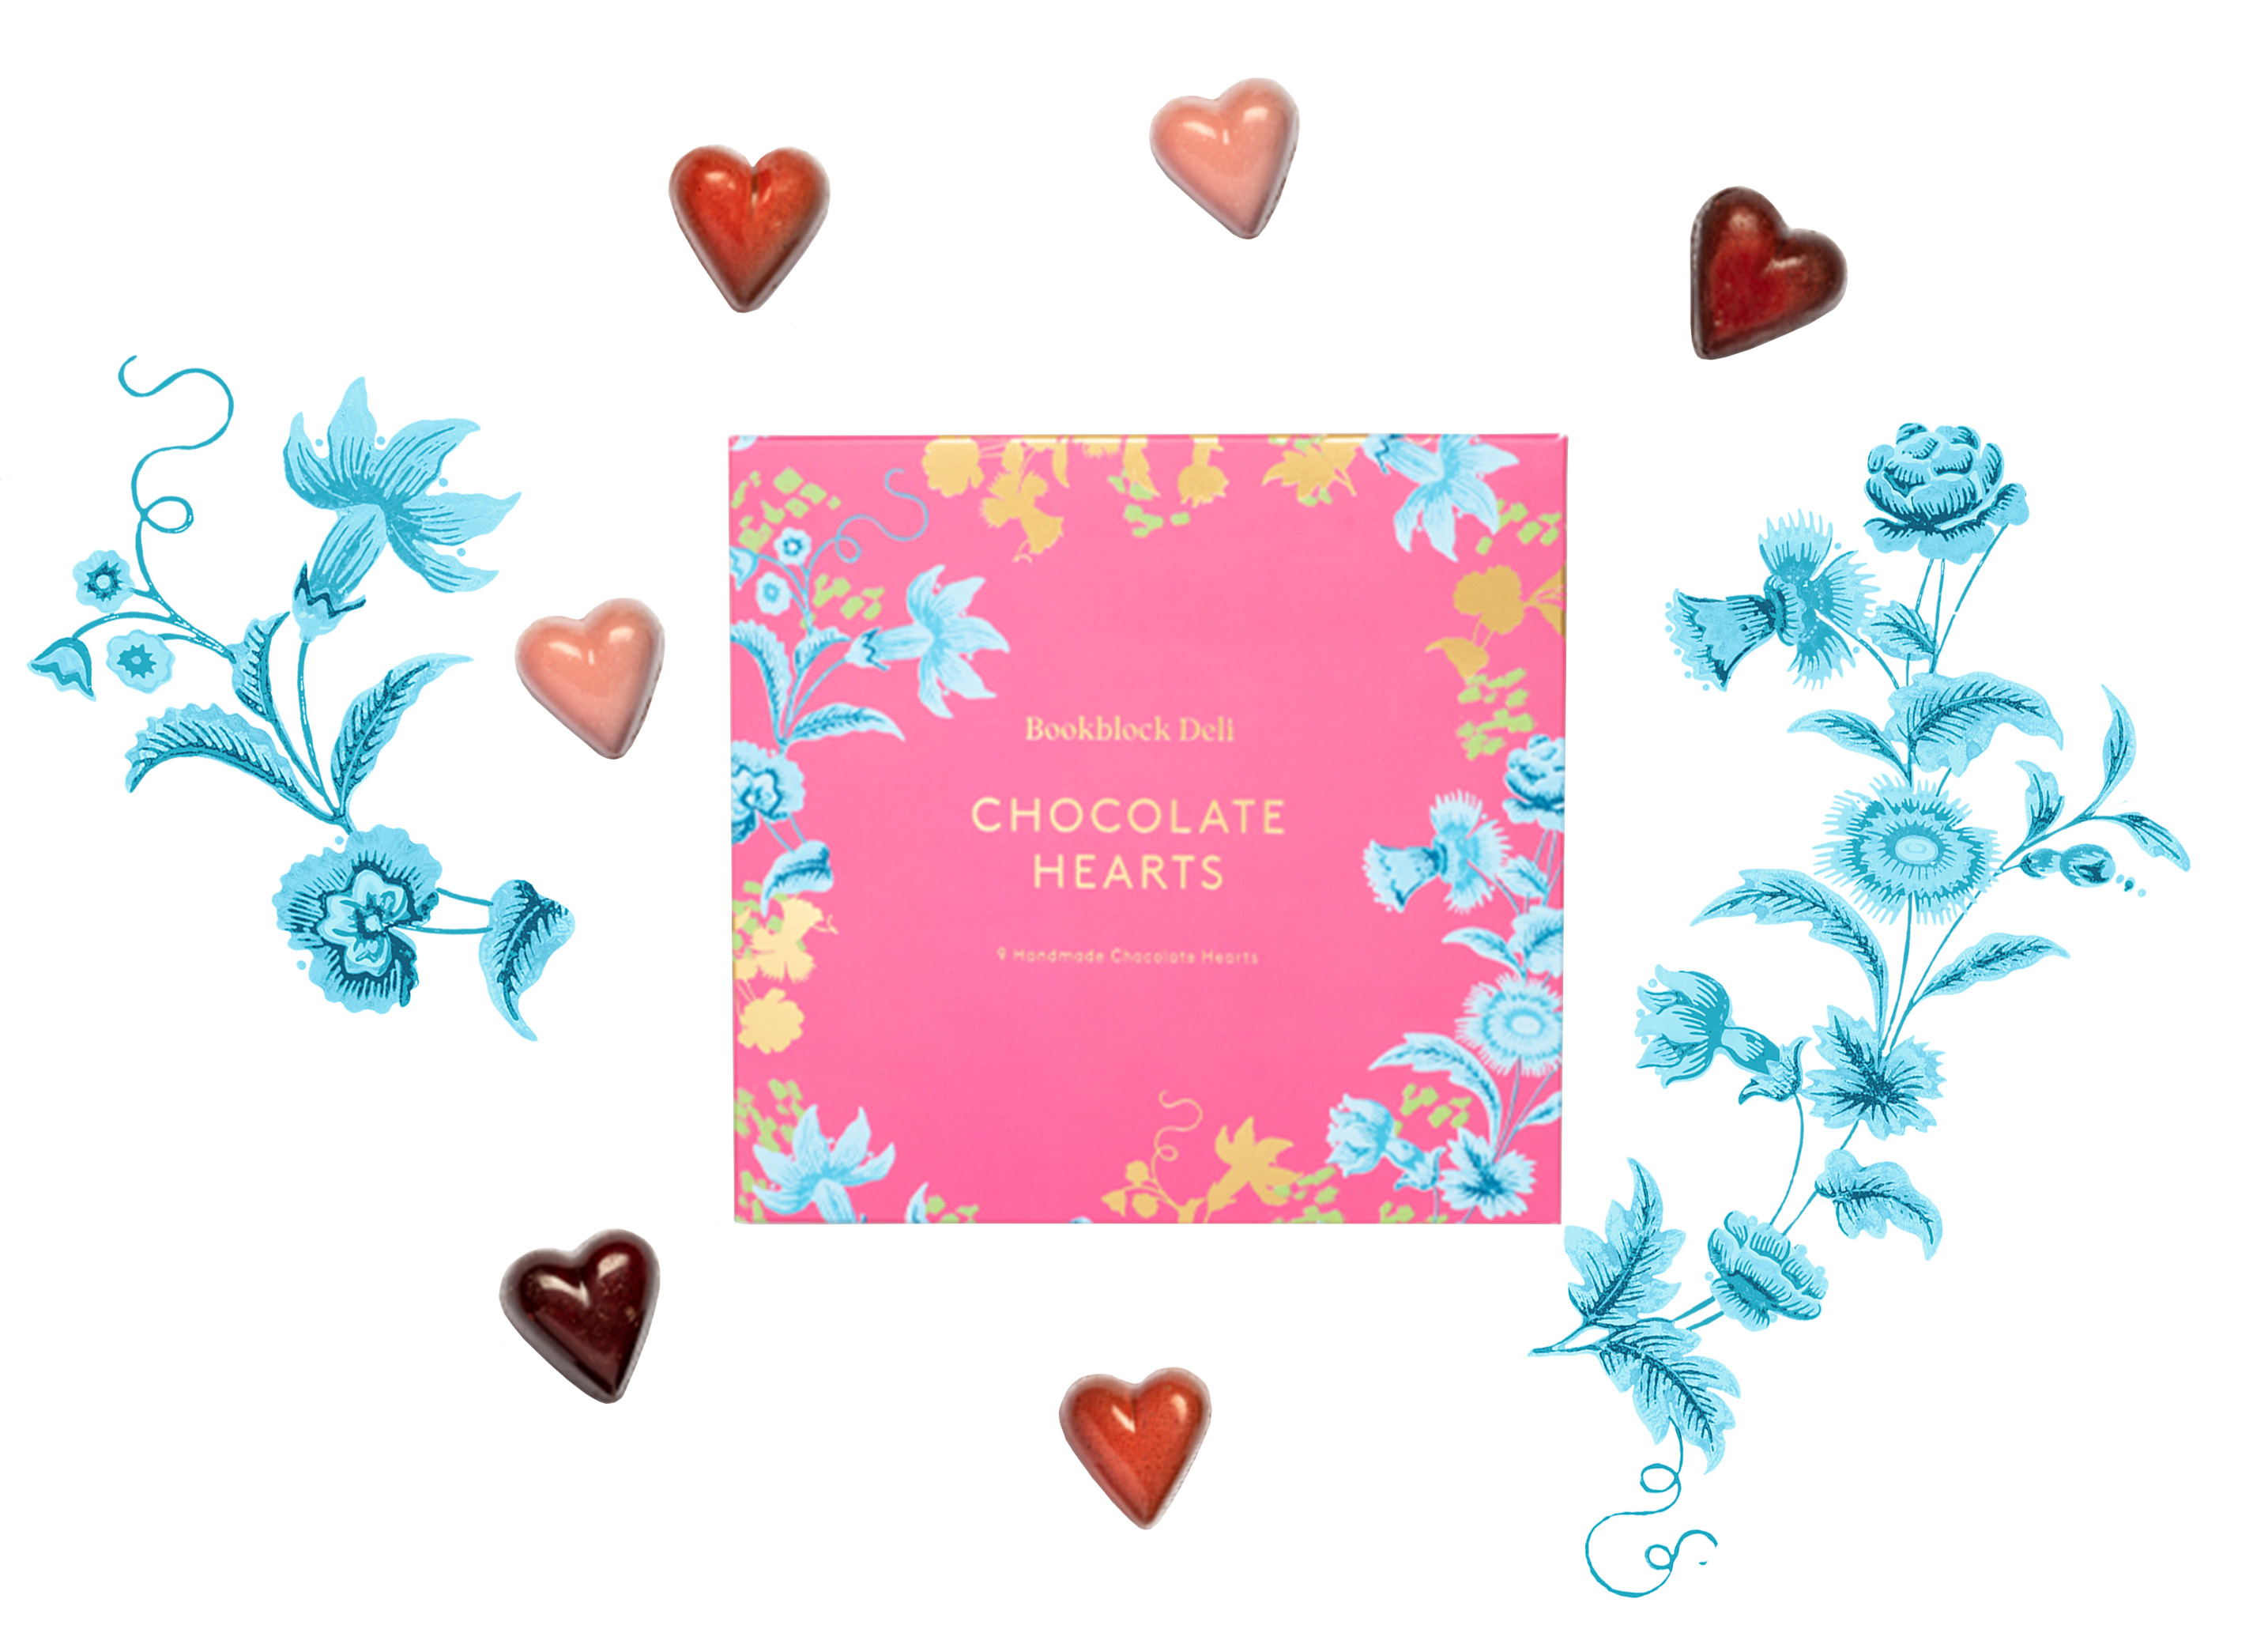 Handmade Chocolate Hearts box with chocolate hearts and floral decoration in pinks and blues